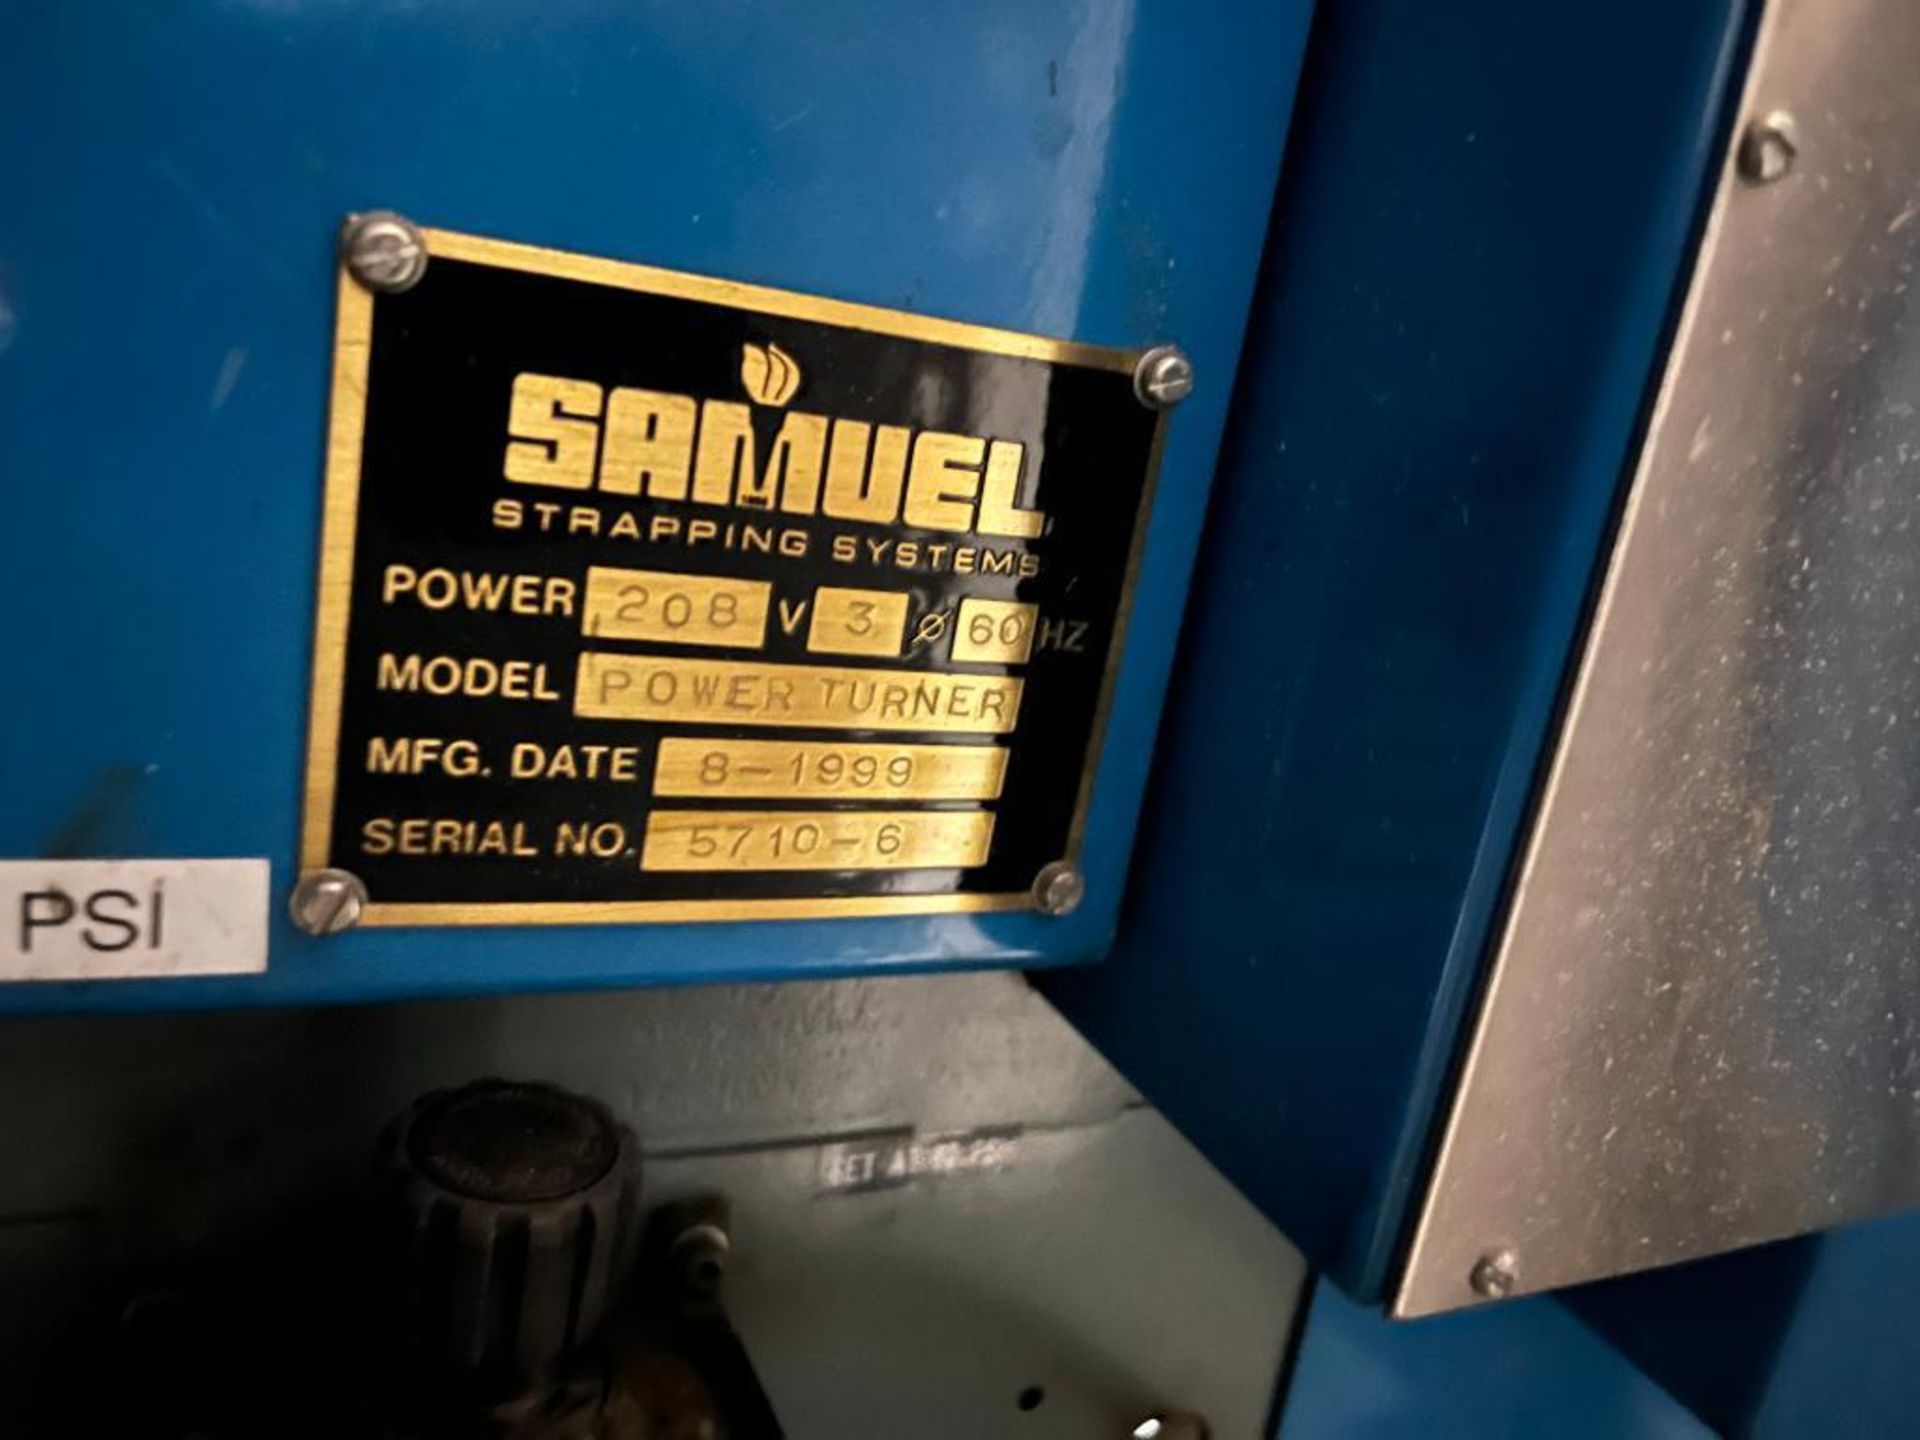 Samuel Strapping Systems Power Turner, S/N 5710-6 (1999) - Image 3 of 3